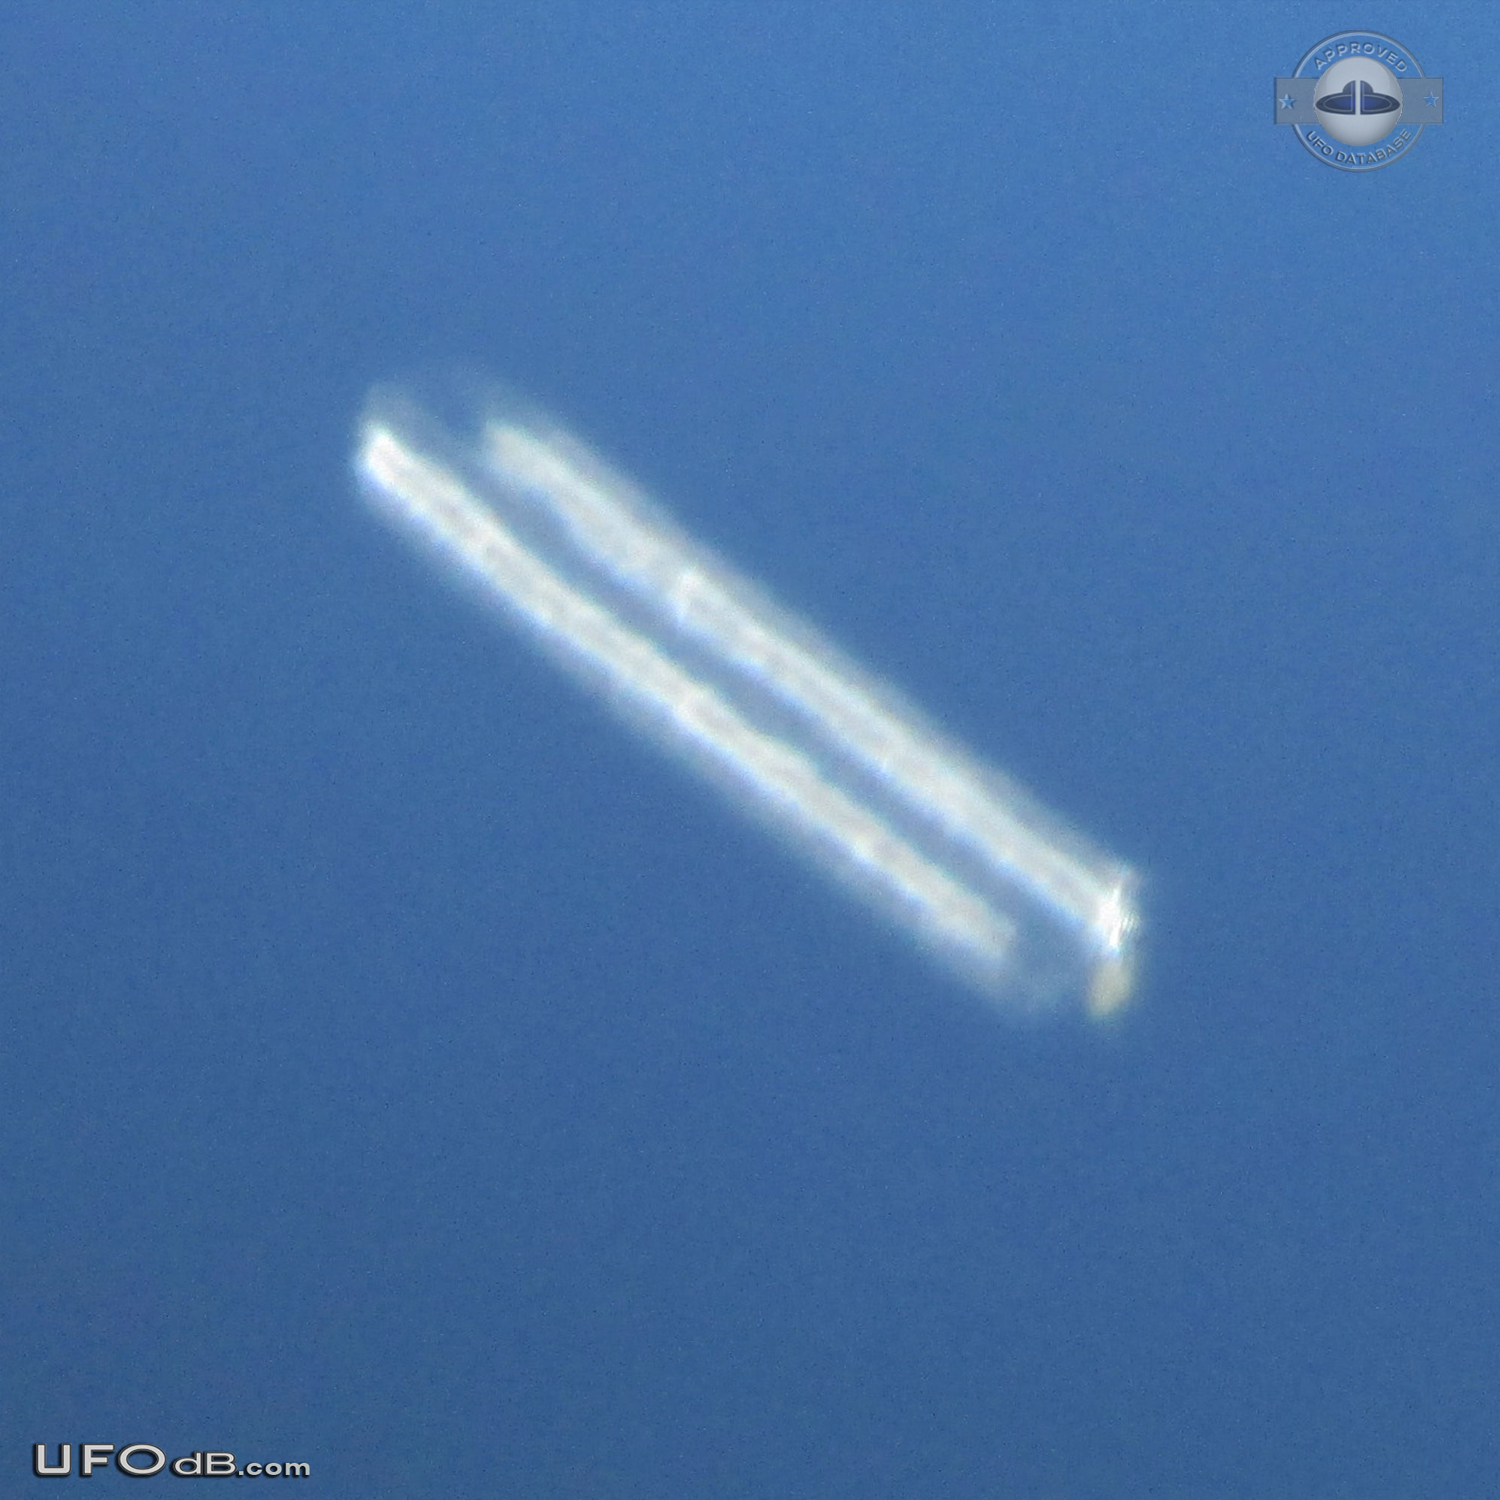 Long cylindrical UFO in bright day light over Virgies, Kentucky 2012 UFO Picture #503-2